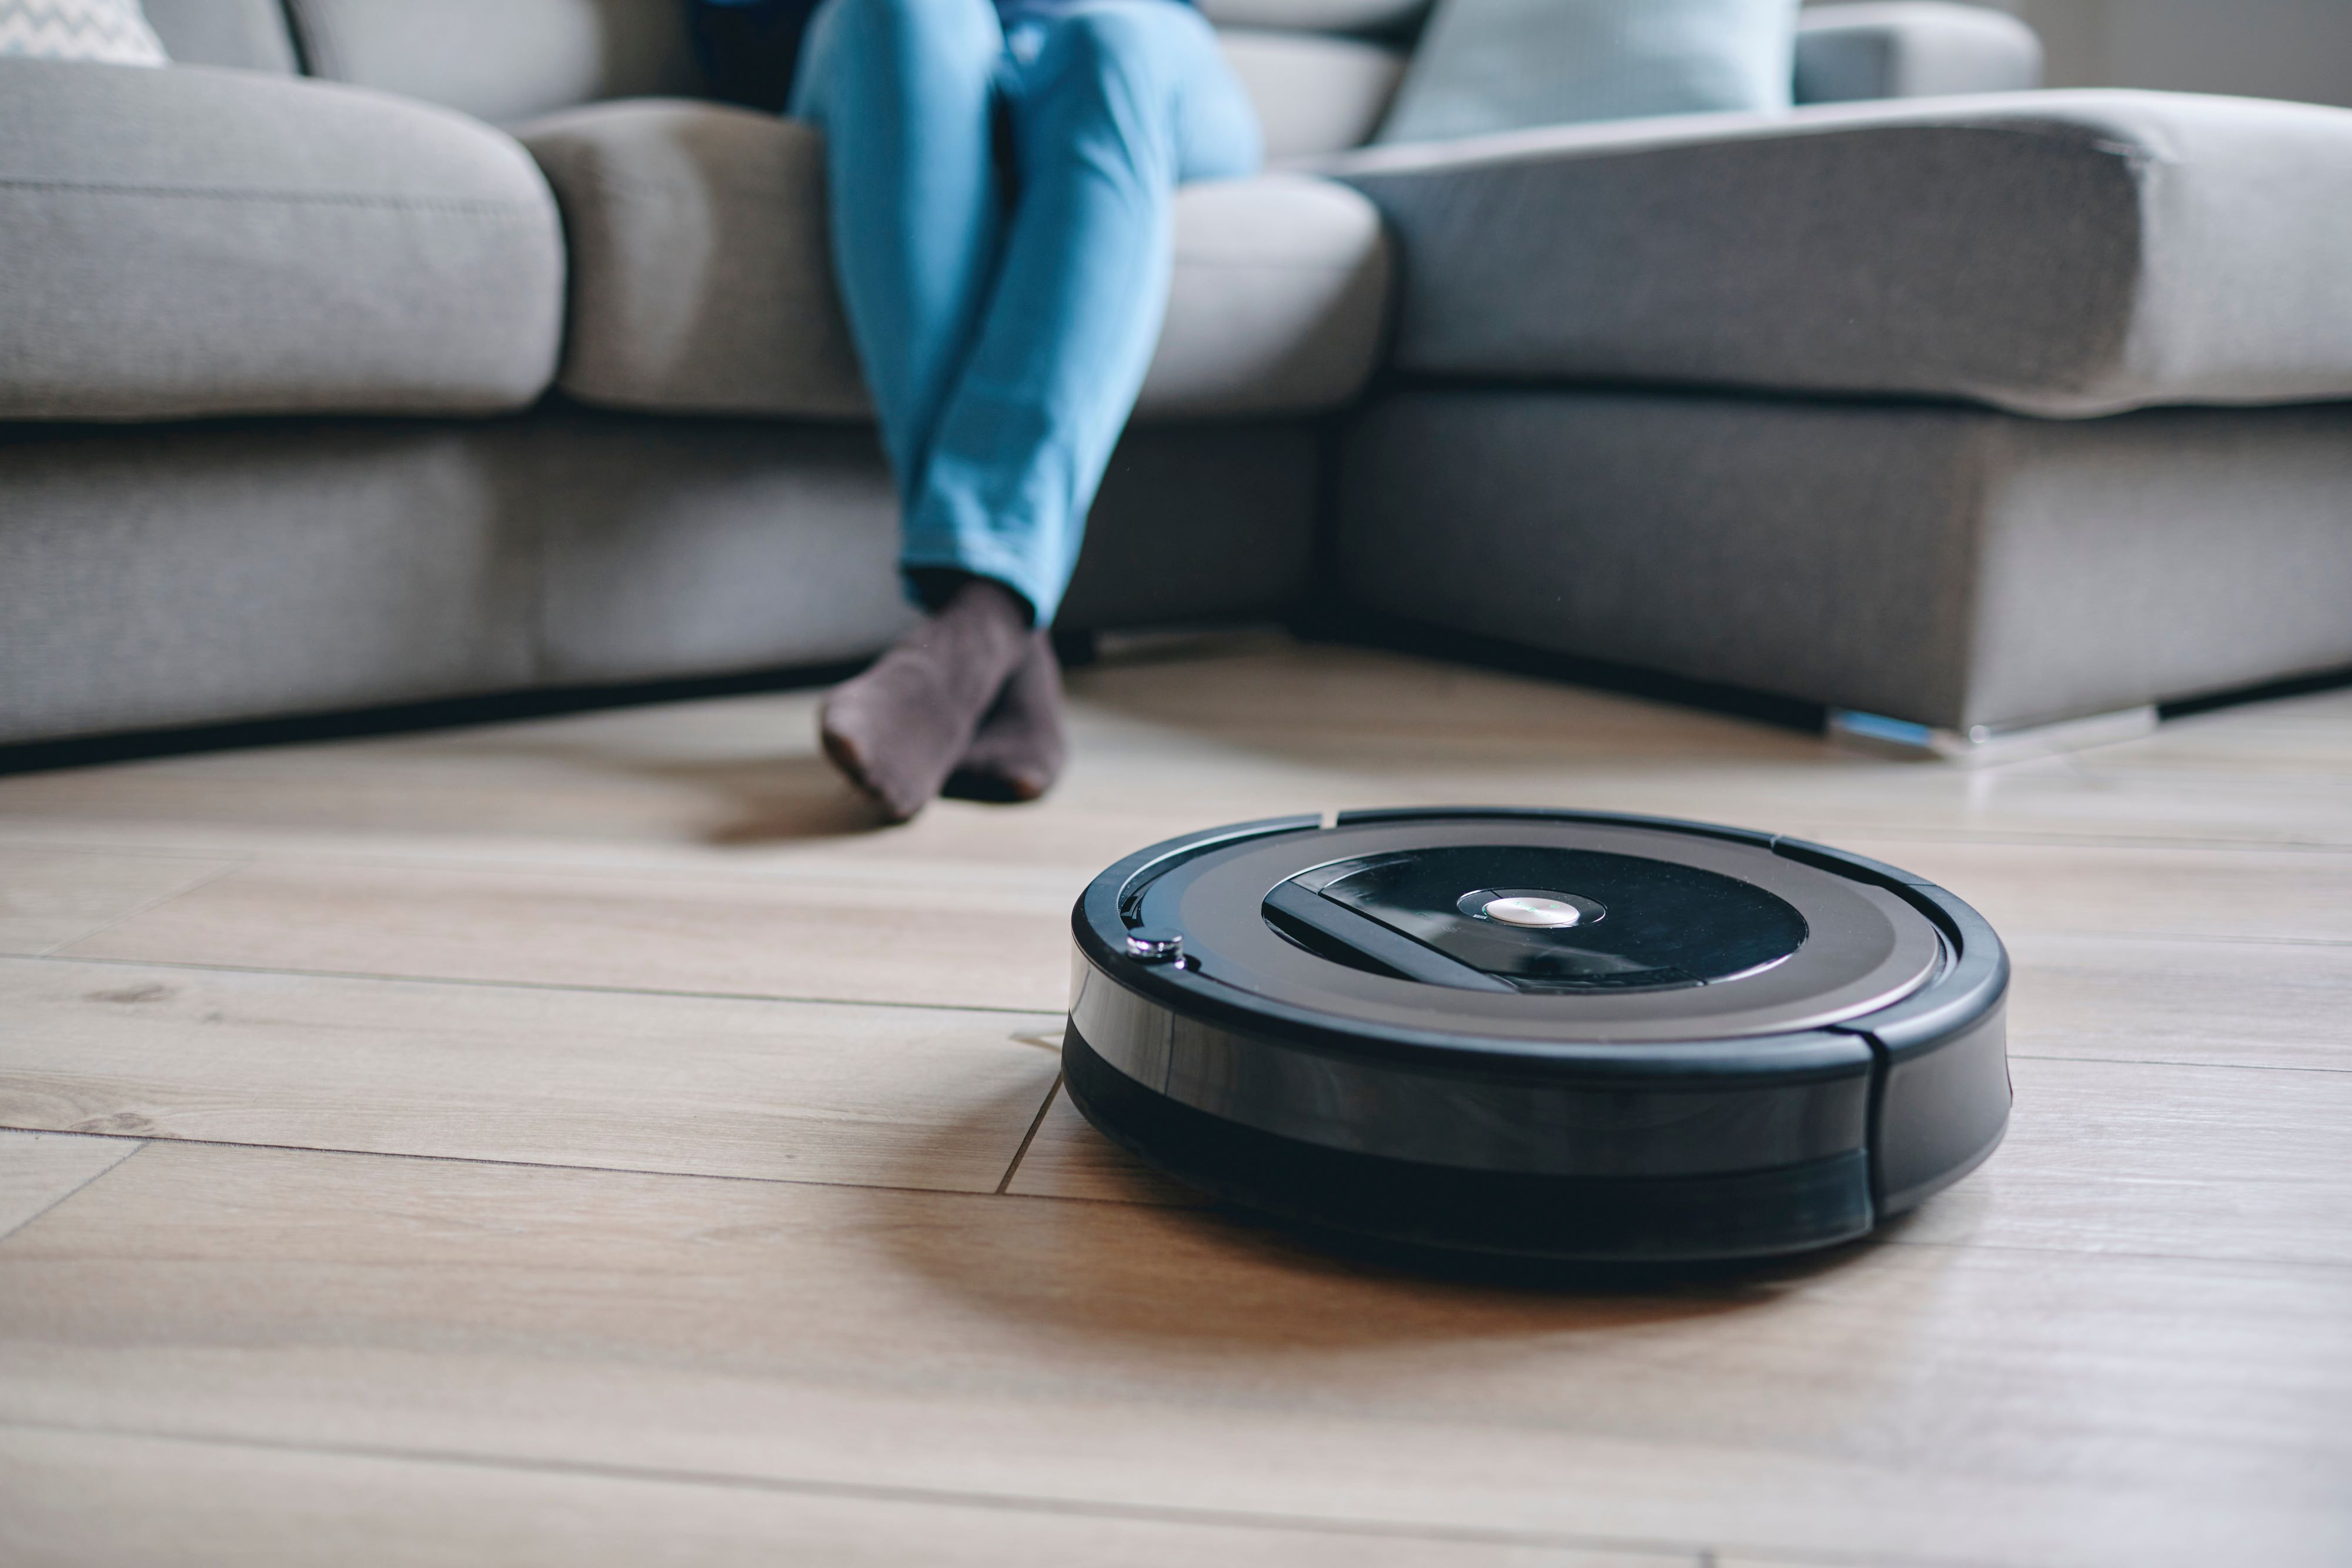 a robot vacuum cleans the floor while a person relaxes